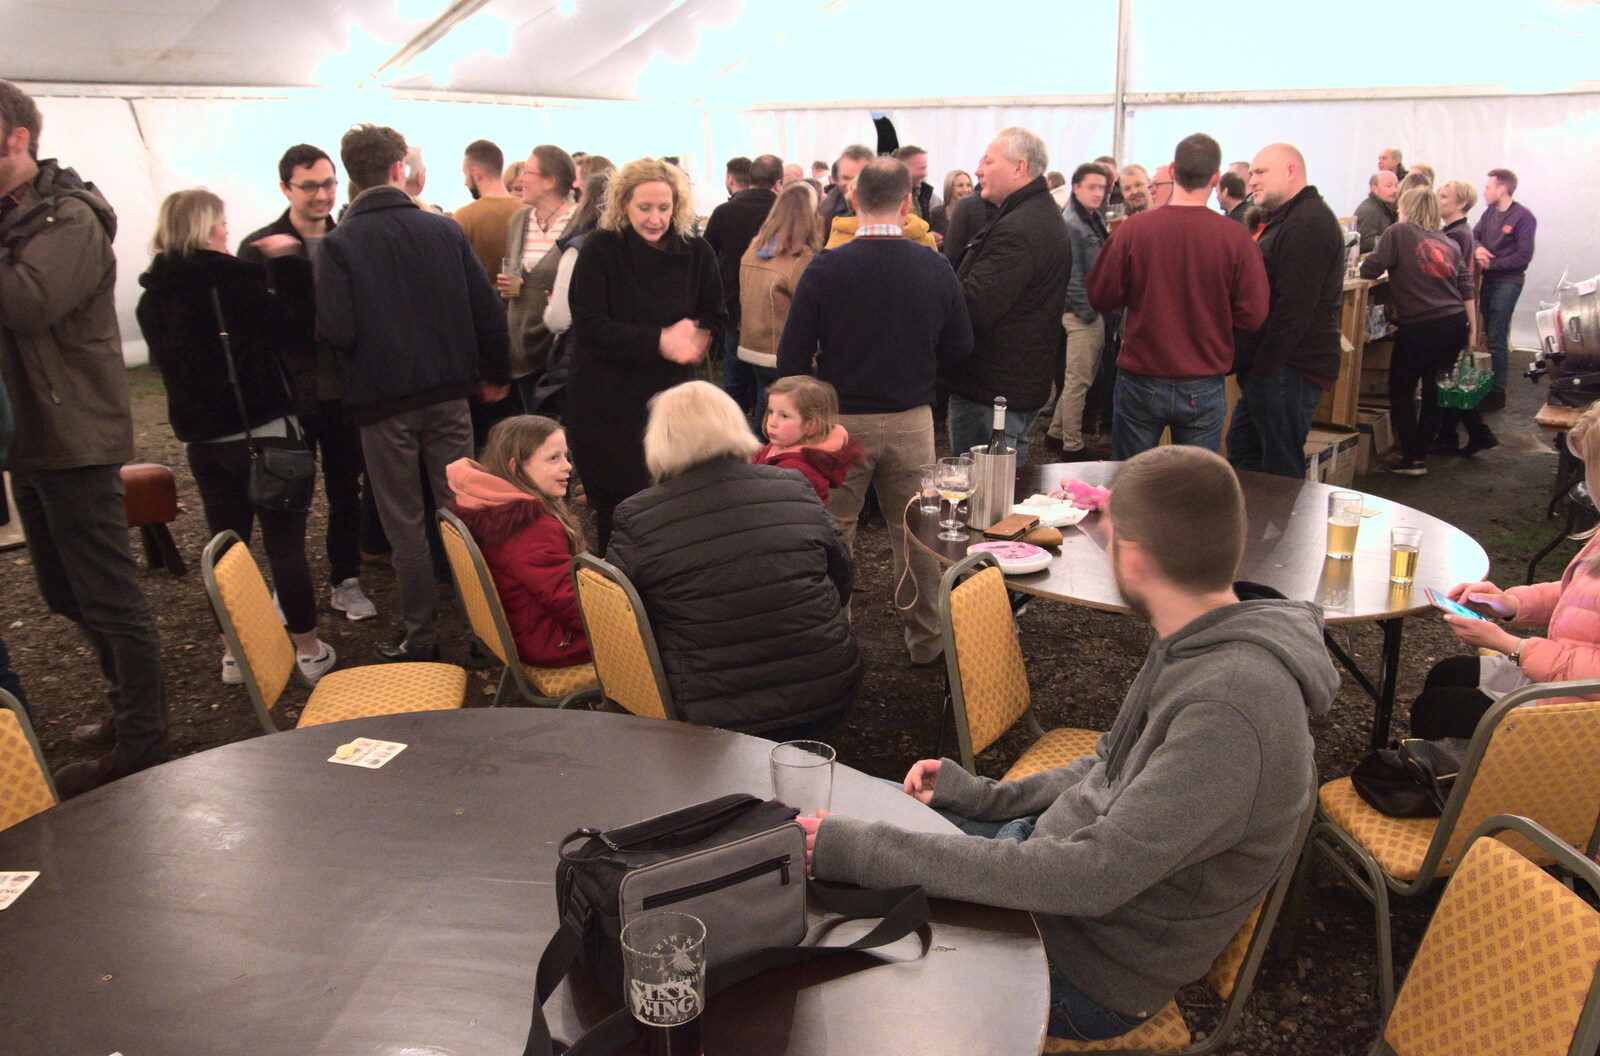 The marquee has filled up from The Star Wing Winter Beer Fest, Redgrave, Suffolk - 31st January 2020